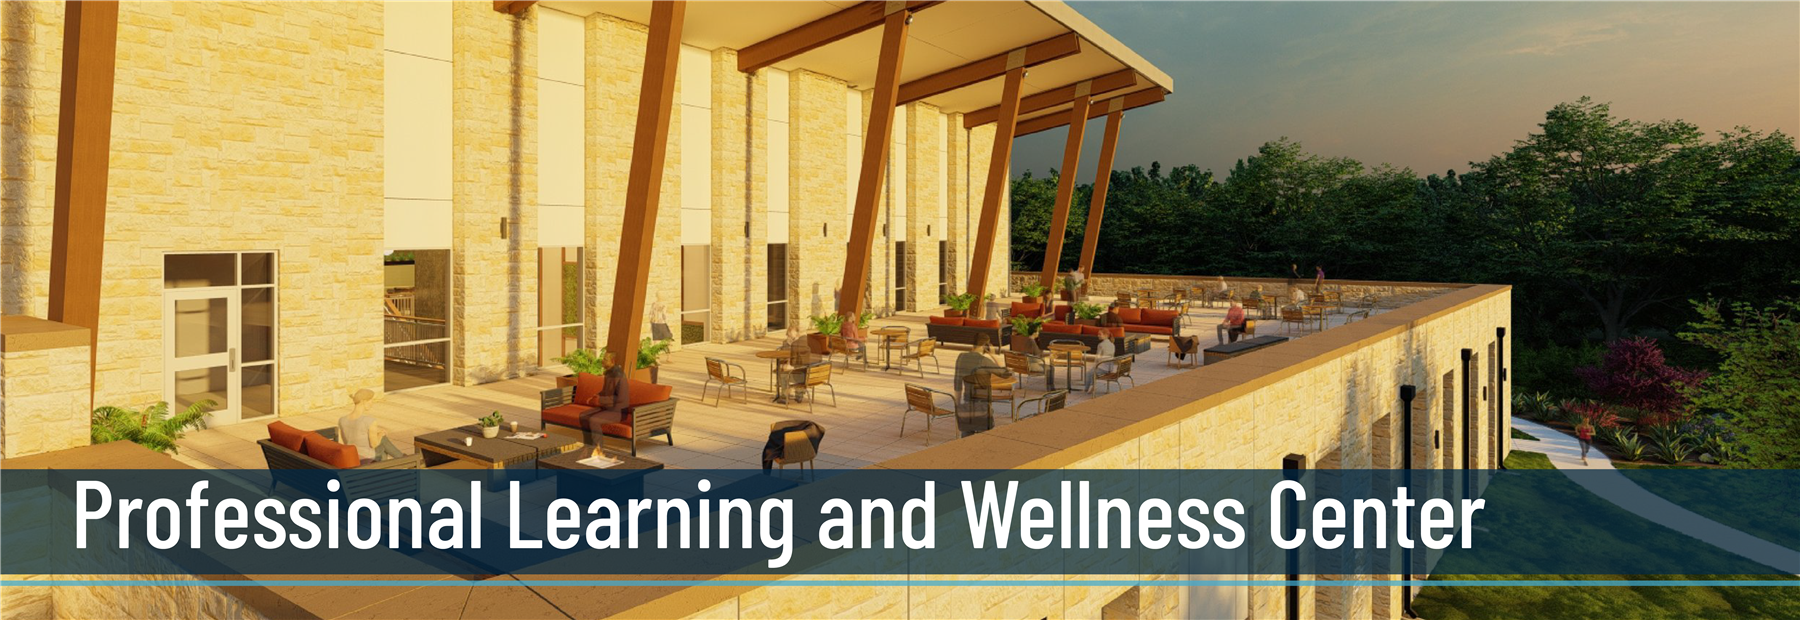 Professional Learning and Wellness Center